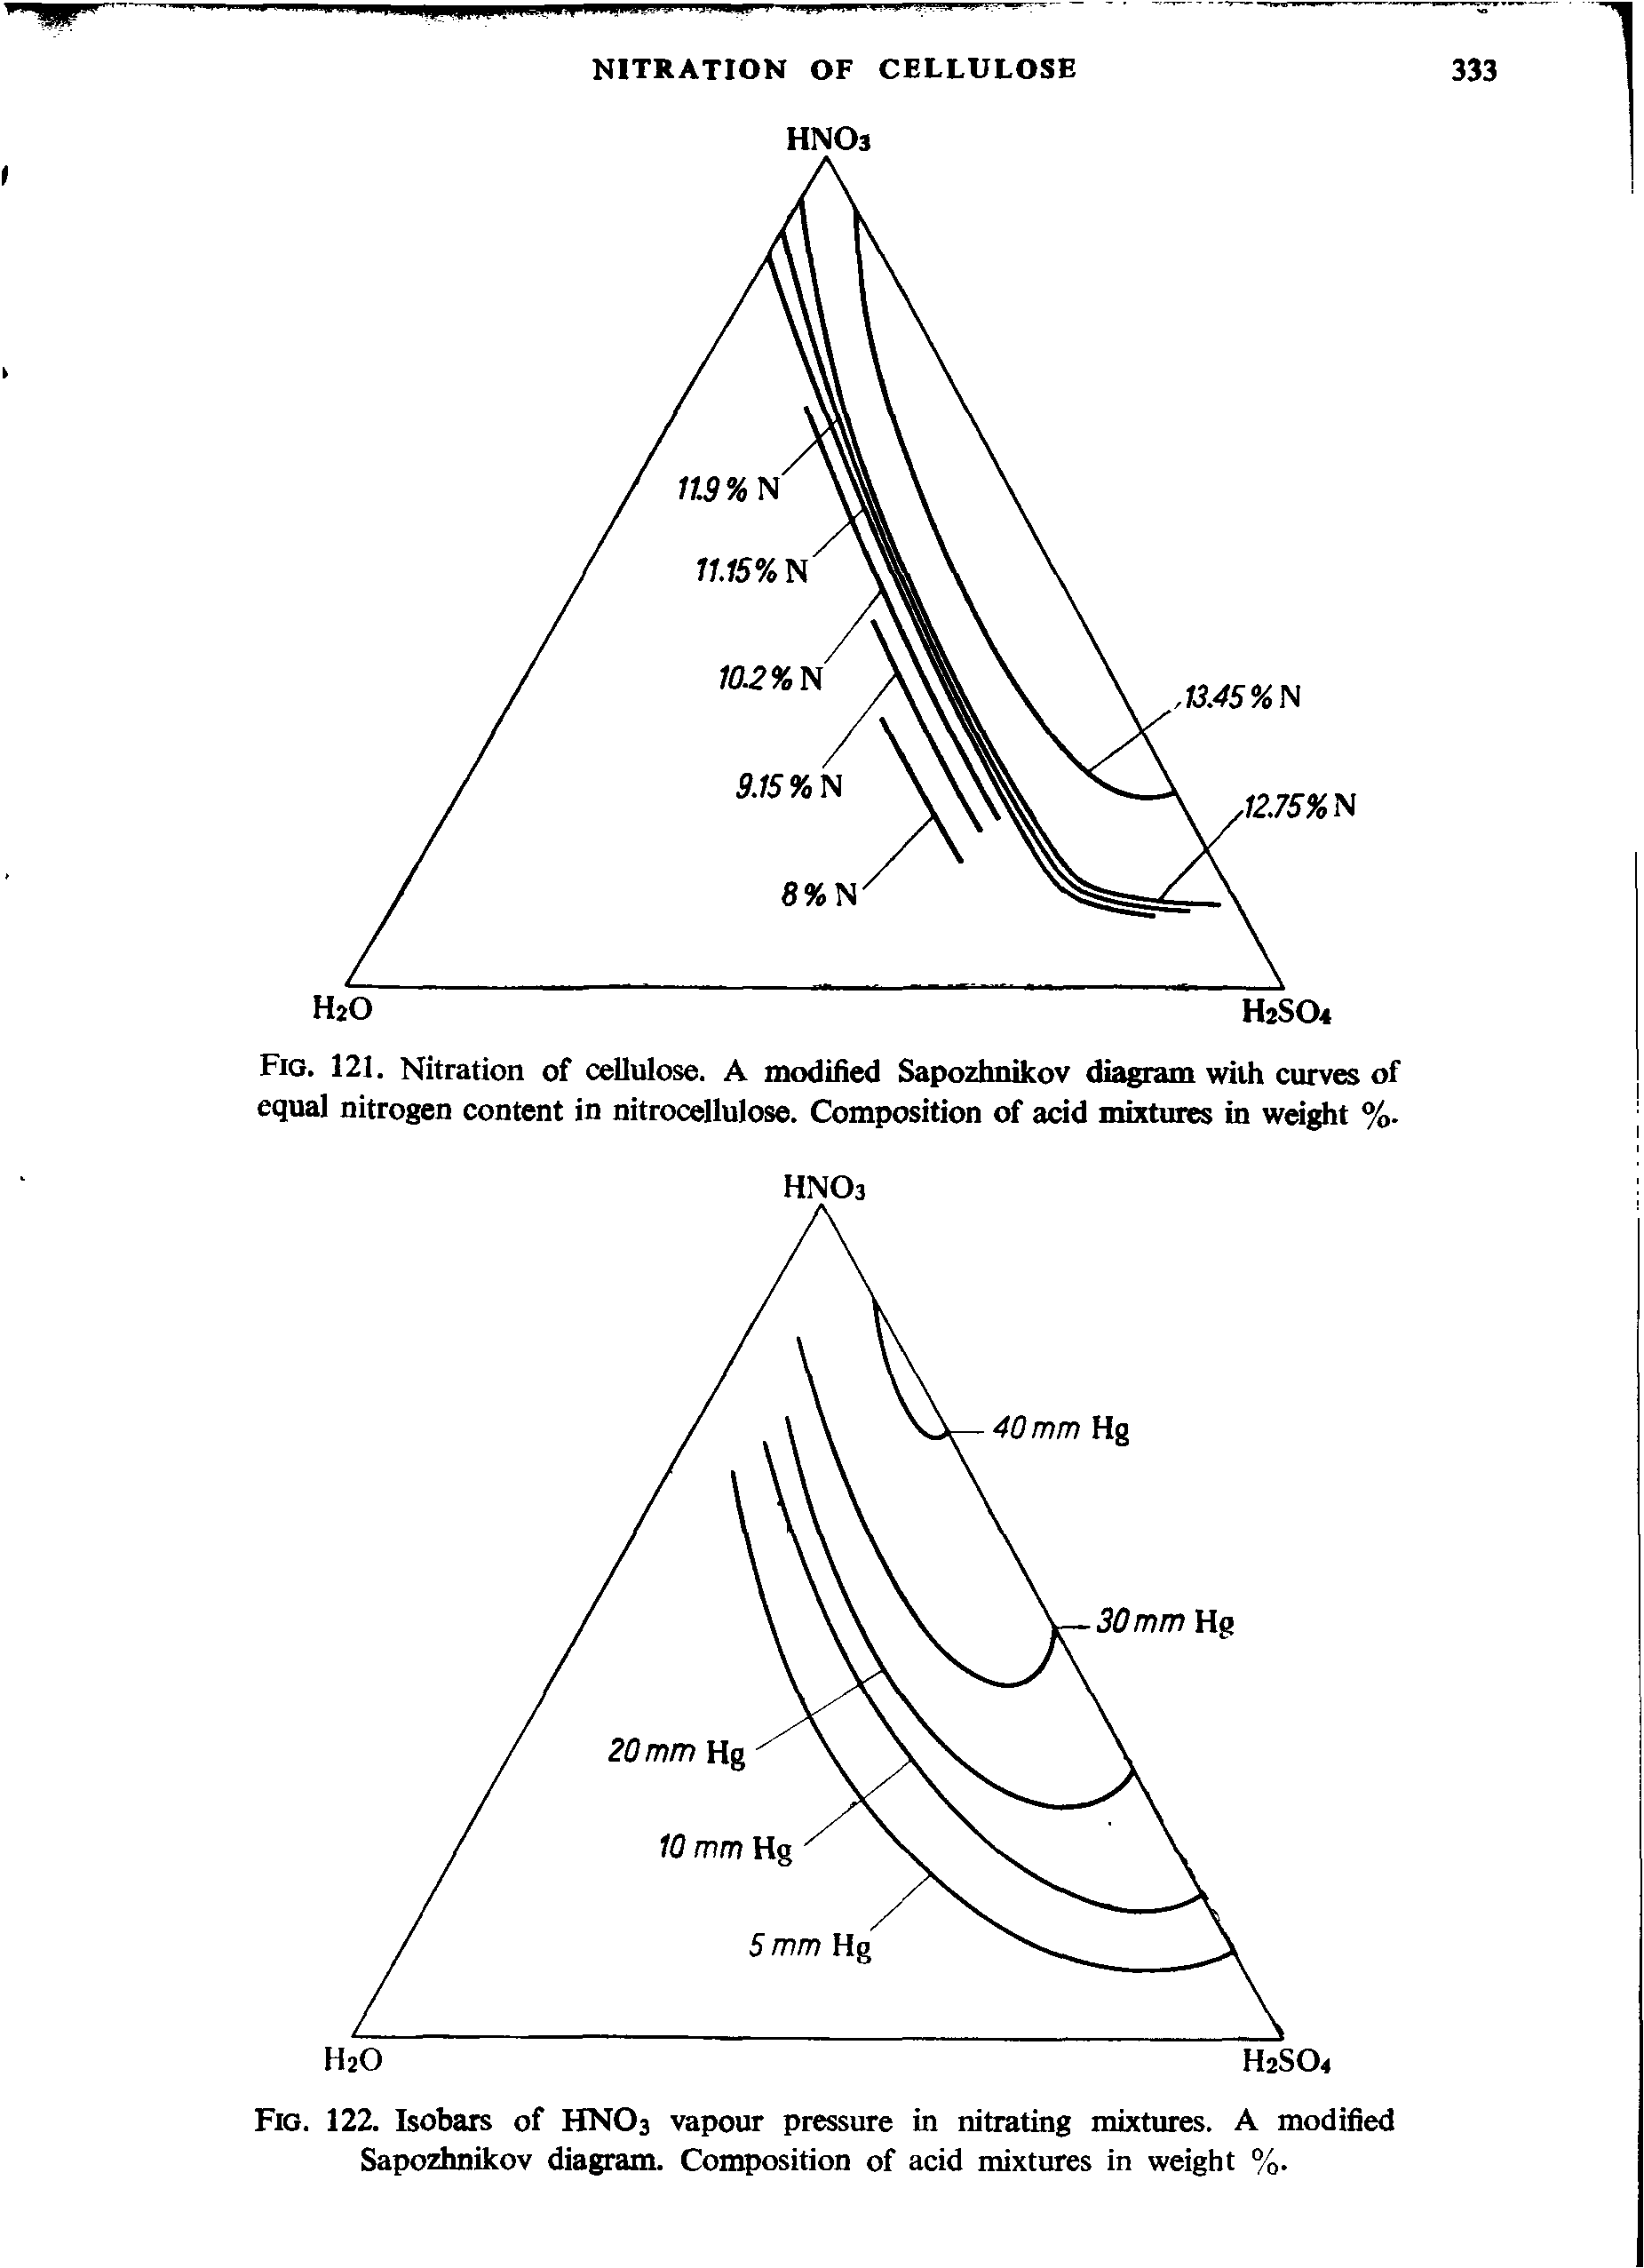 Fig. 122. Isobars of HNO3 vapour pressure in nitrating mixtures. A modified Sapozhnikov diagram. Composition of acid mixtures in weight %.